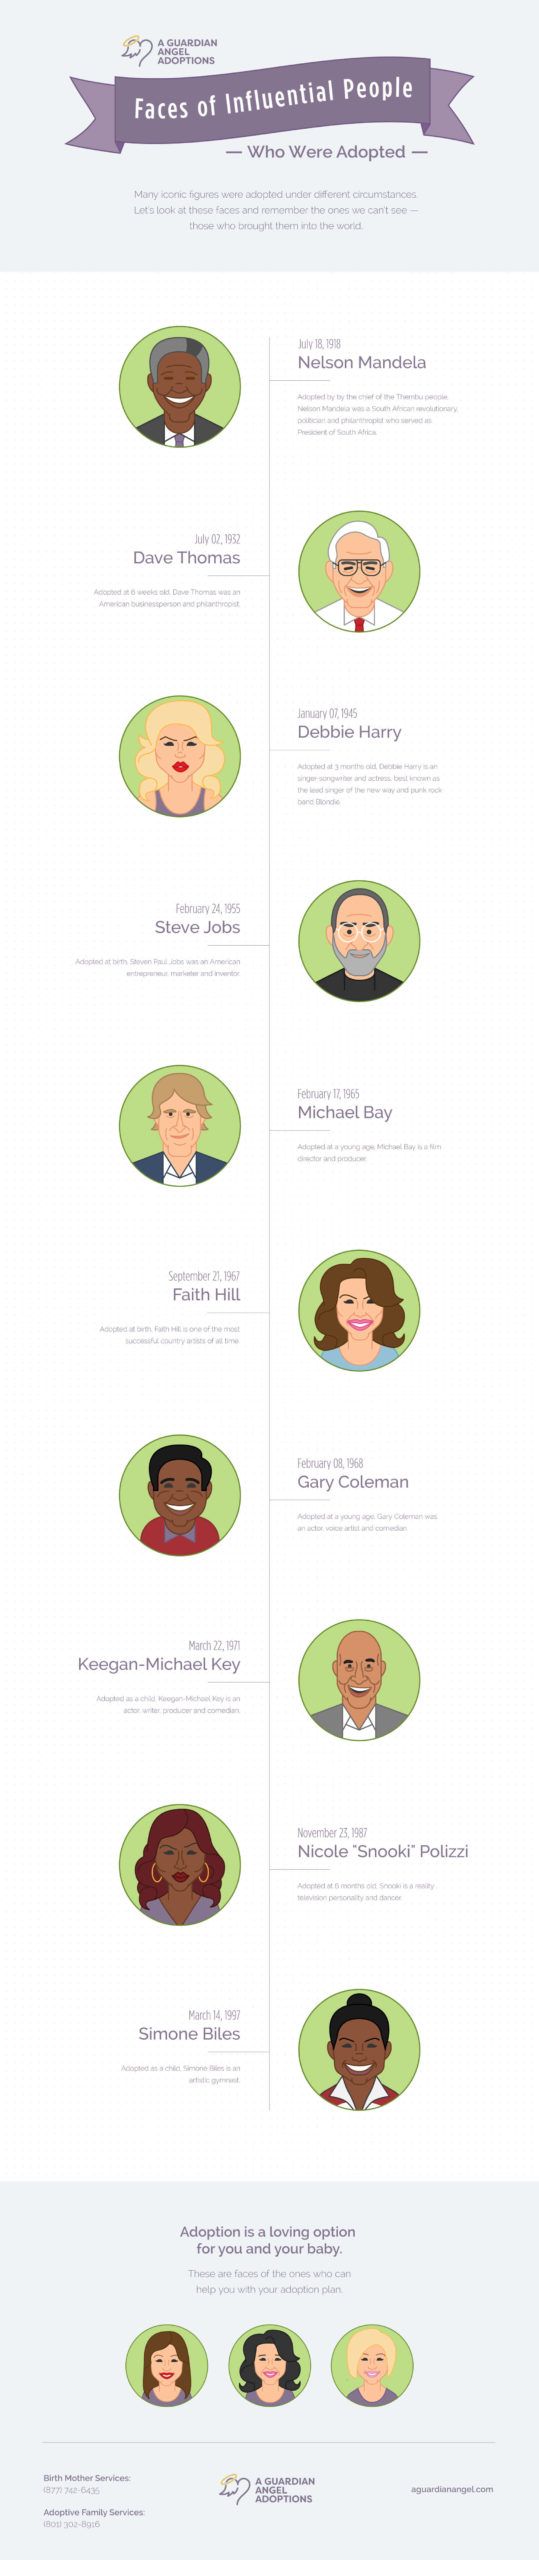 A graphic of famous people who were adopted: Nelson Mandela, Dave Thomas, Debbie Harry, Steve Jobs, Michael Bay, Faith Hill, Gary Coleman, Keegan-Michael Kelly, Nicole "Snookie" Polizzi, Simone Biles